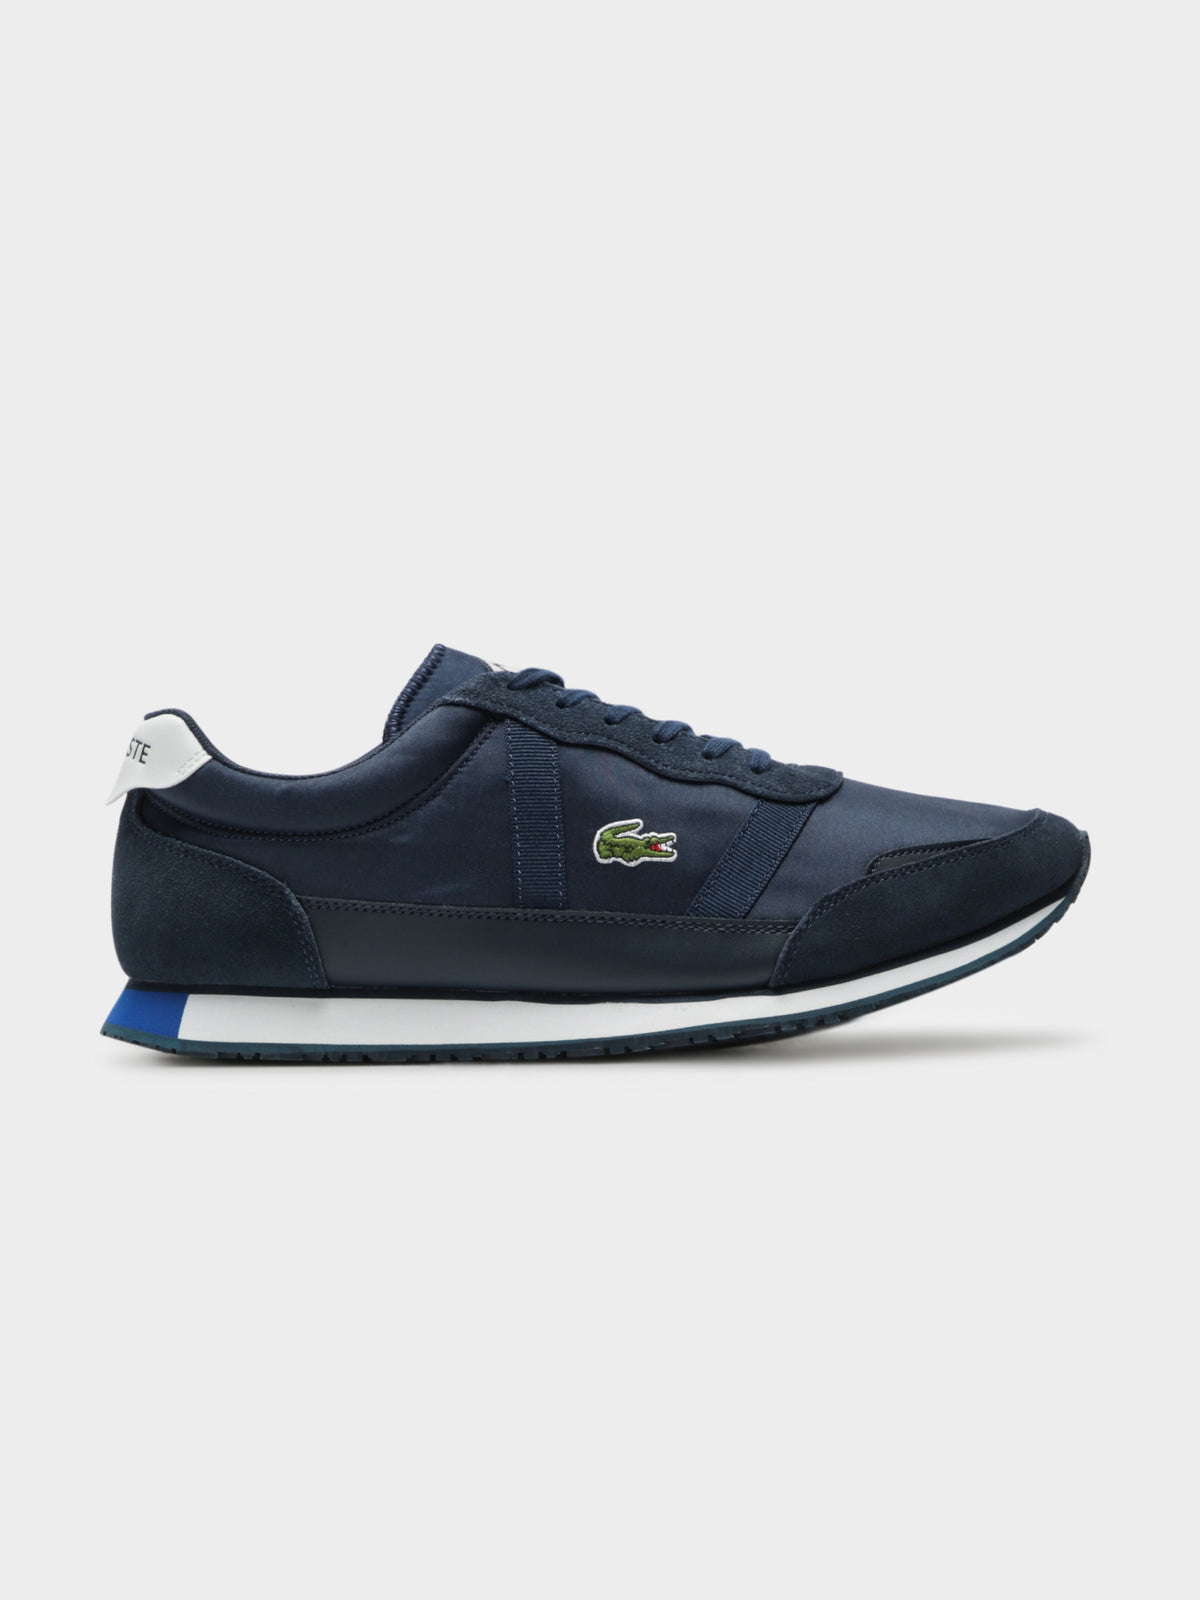 Mens Partner 119 4 Sneakers in Navy and White